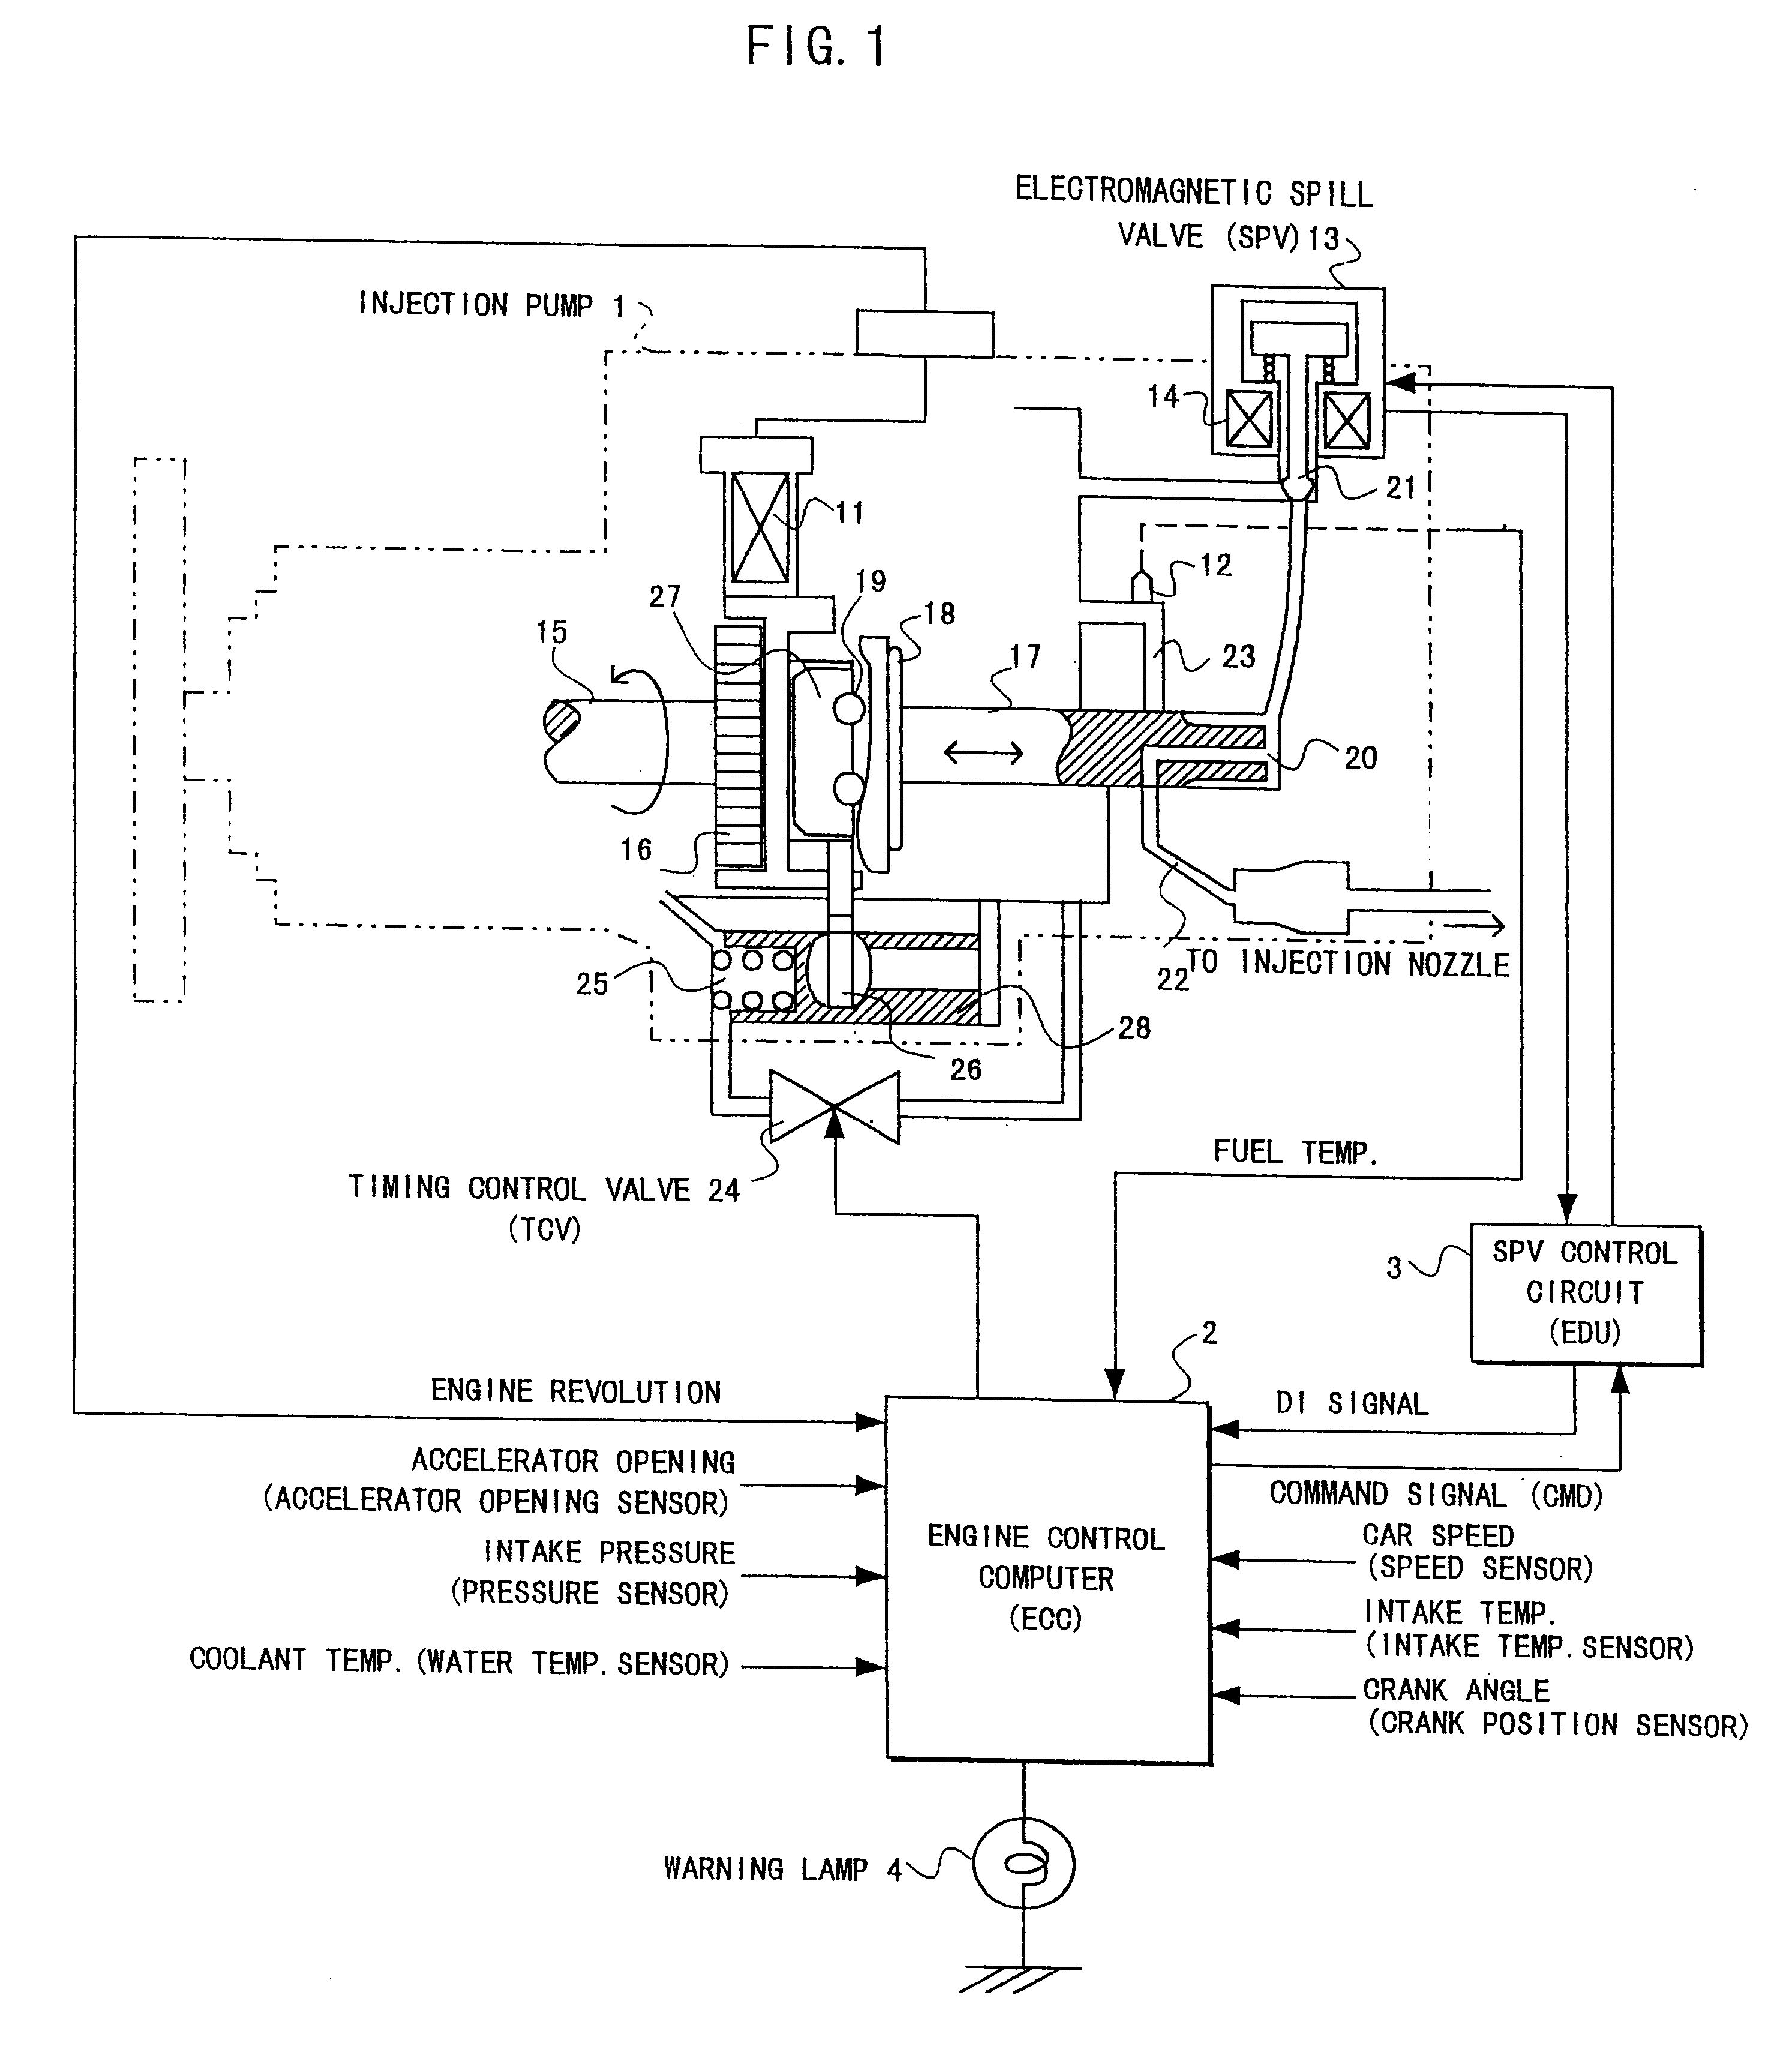 Electronic fuel injection apparatus